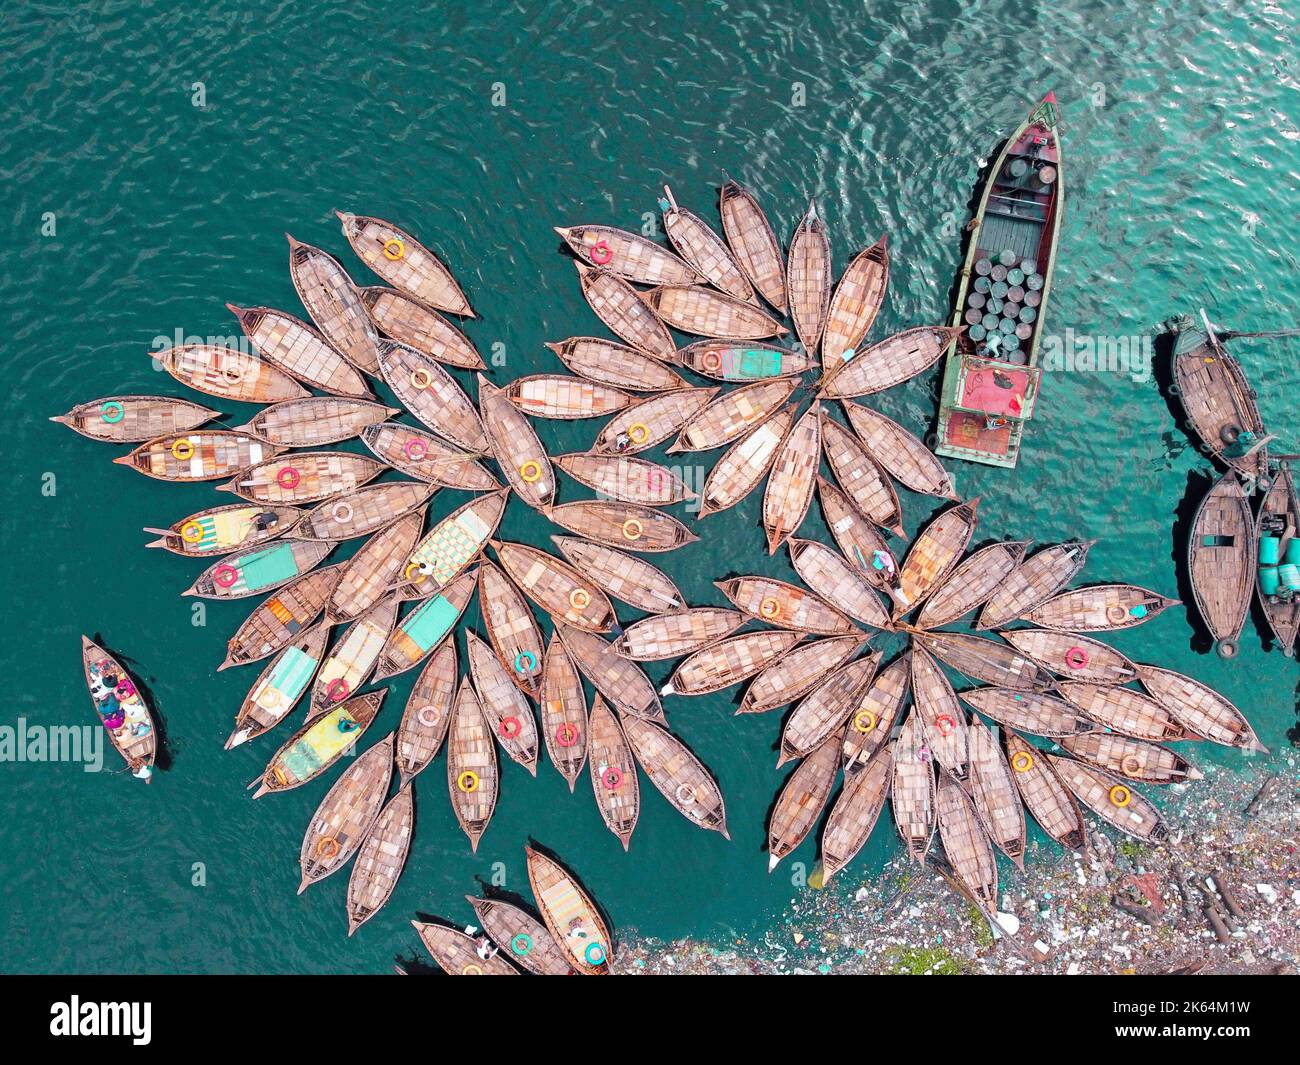 Dhaka, Dhaka, Bangladesh. 11th Oct, 2022. A fleet of wooden boats, which resemble the petals of flower, waits to ferry commuters across the Buriganga River to jobs at a major river port in Dhaka, Bangladesh while boatmen tie the boats together in a flowery pattern and get forty winks ahead of the afternoon rush hour. They work 16 hours a day and get less than Â£5 for this. So, they take rest whenever they get a chance to relieve the fatigue of the long working hours. During that time, most of the boats are tied up together except a few ones and the number of passengers is lower compared to t Stock Photo